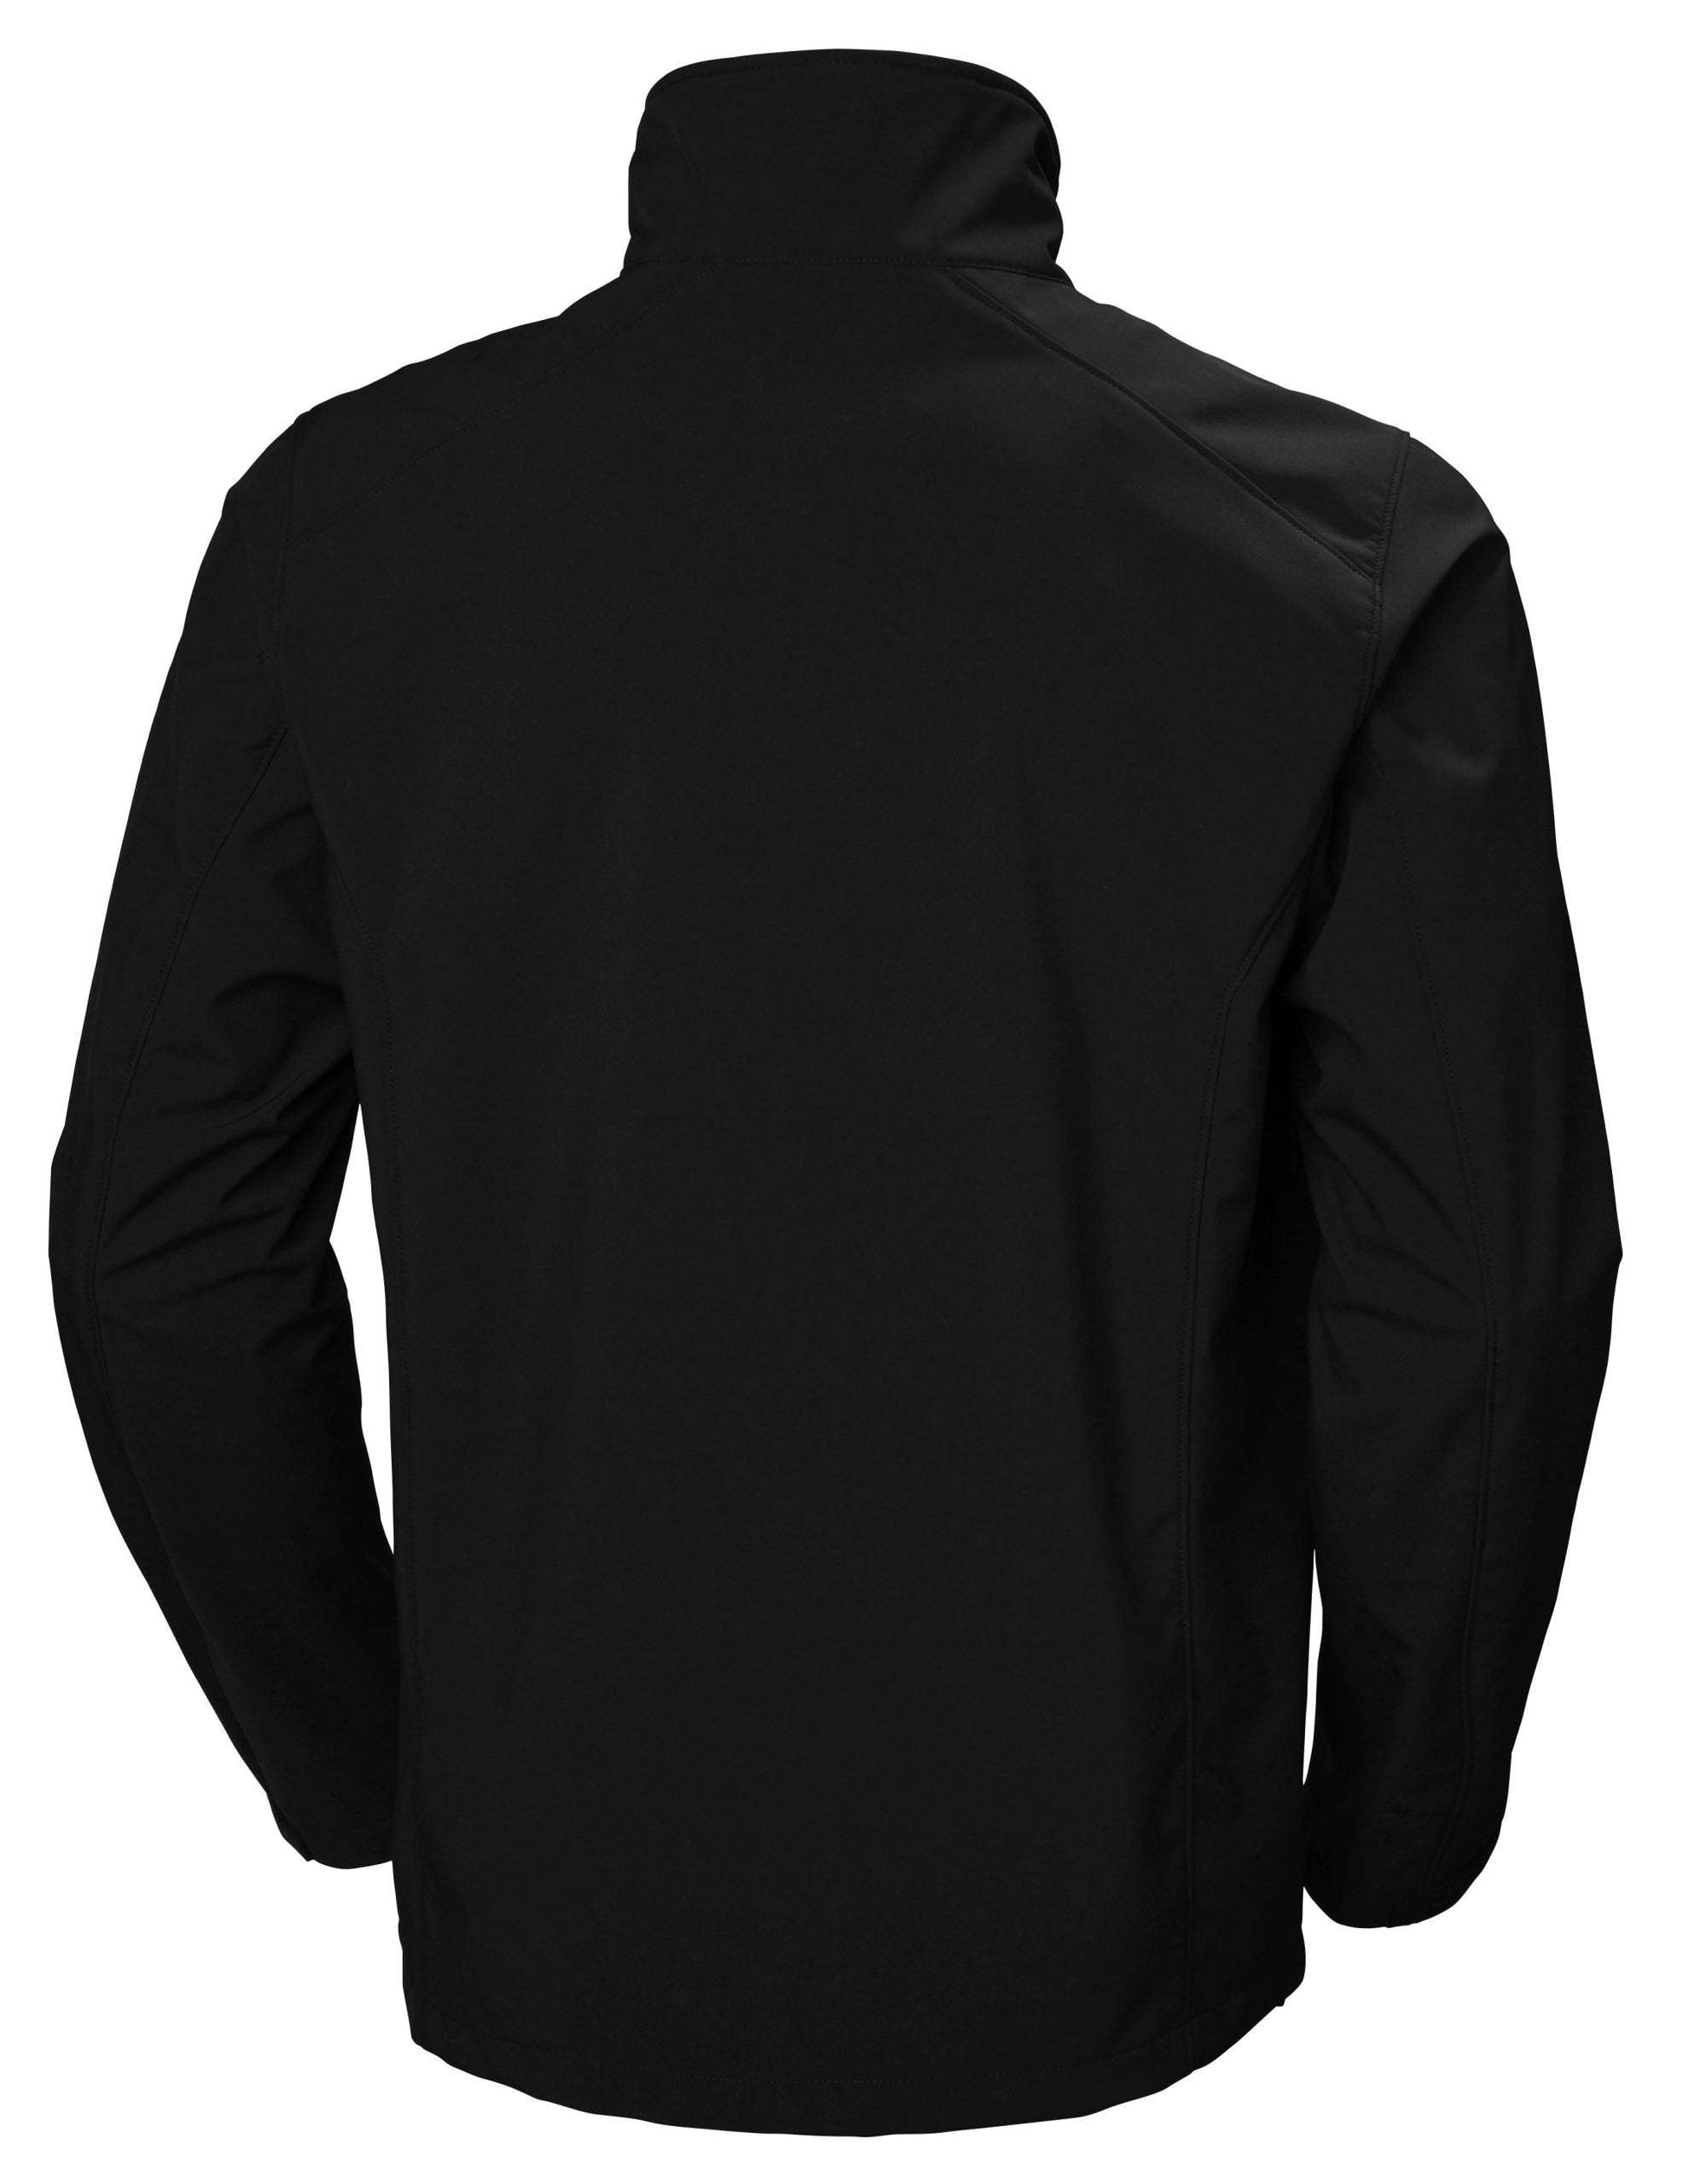 Paramount Softshell Jacket by Helly Hansen - The Luxury Promotional Gifts Company Limited